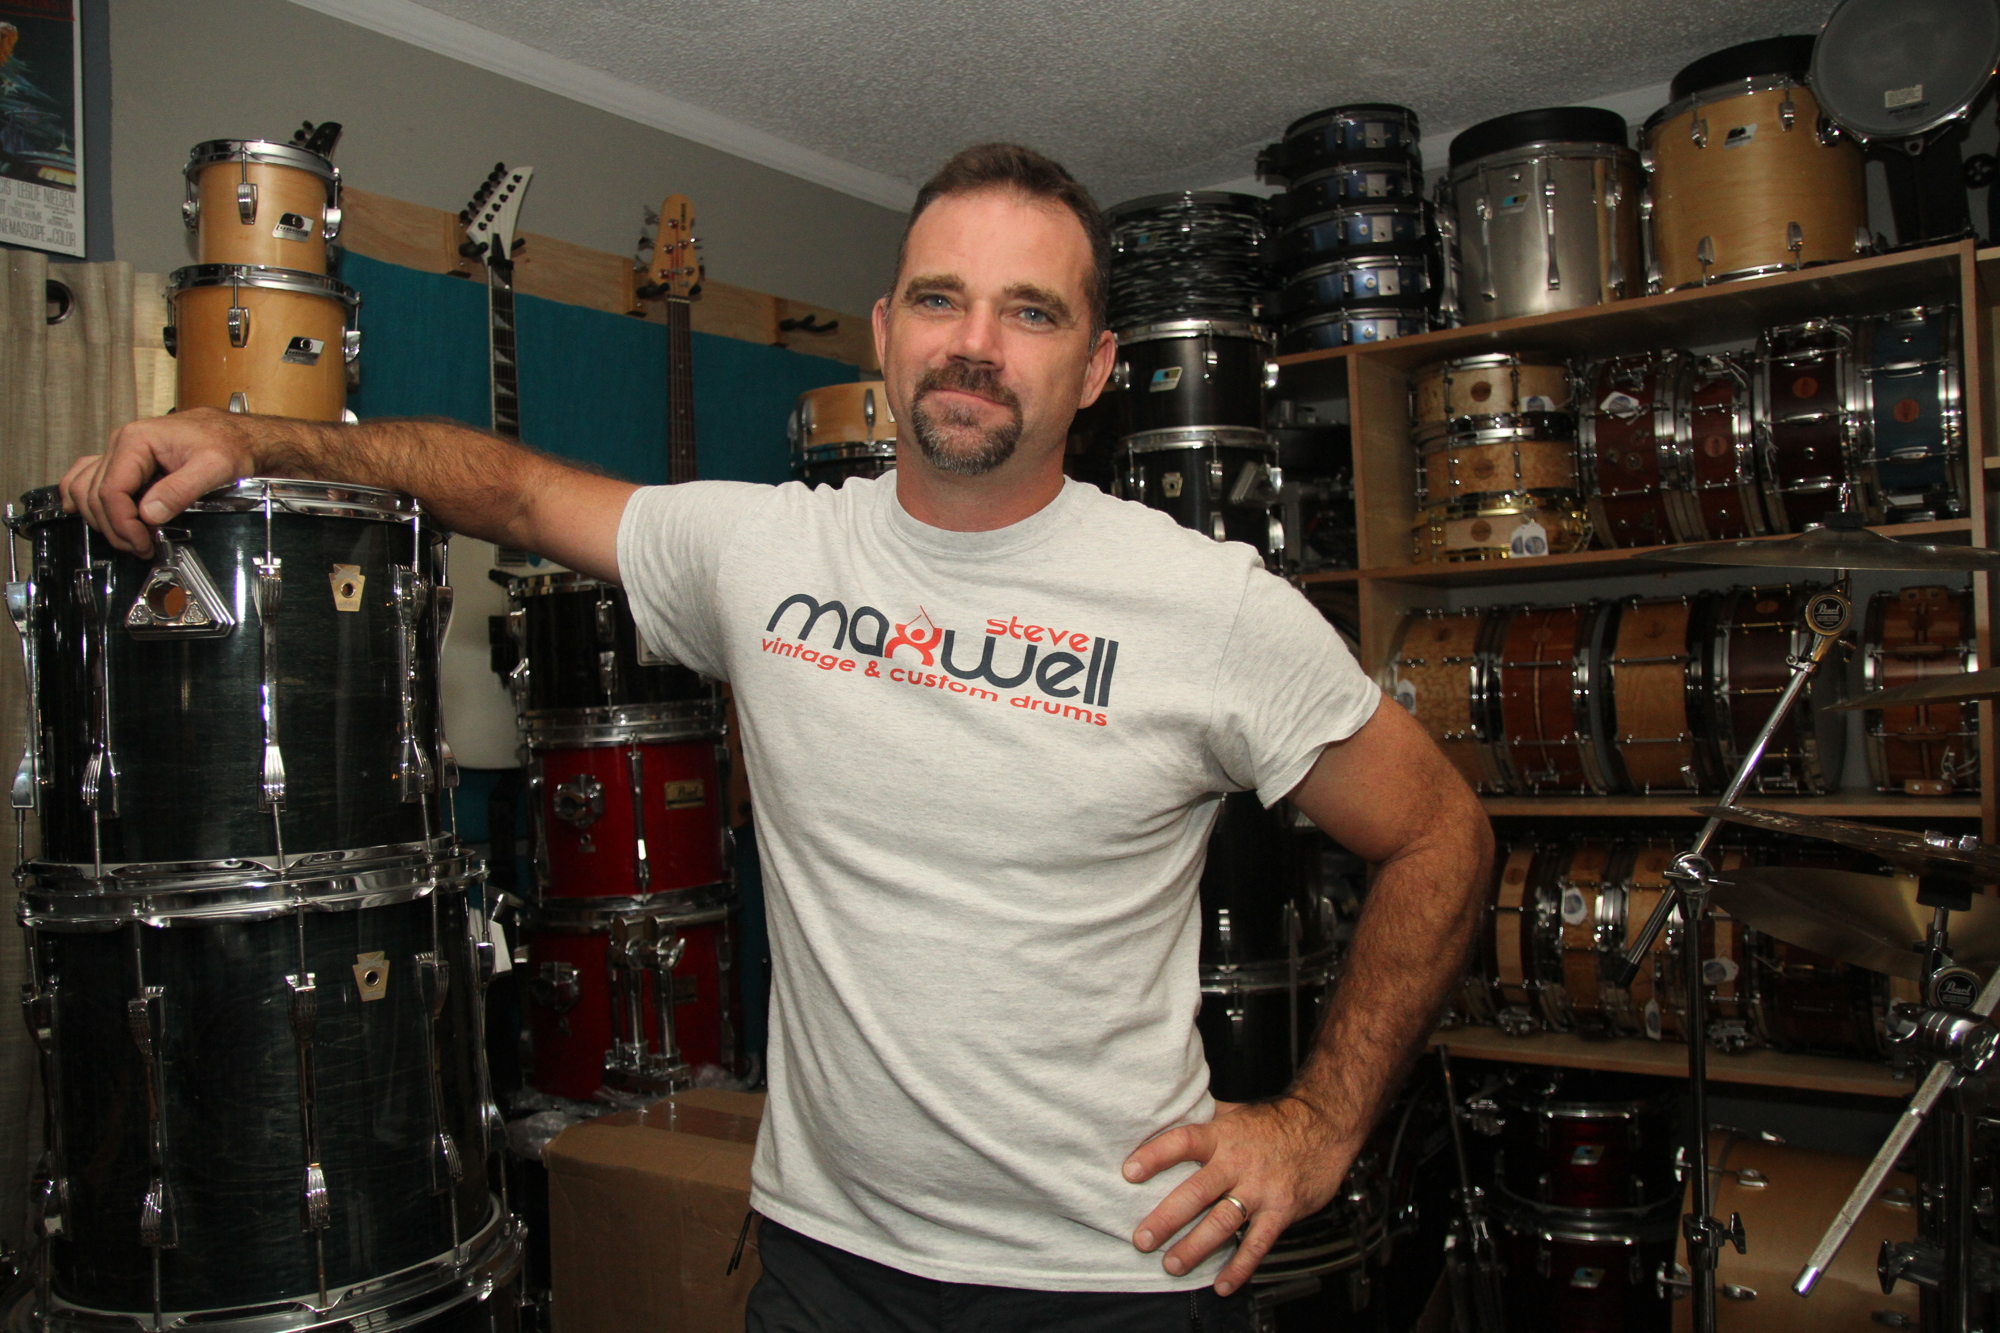 In addition to building drums, Marc Hayward is also a collector. His home studio houses more than 50 snare drums and several complete drum kits from a variety of manufacturers.